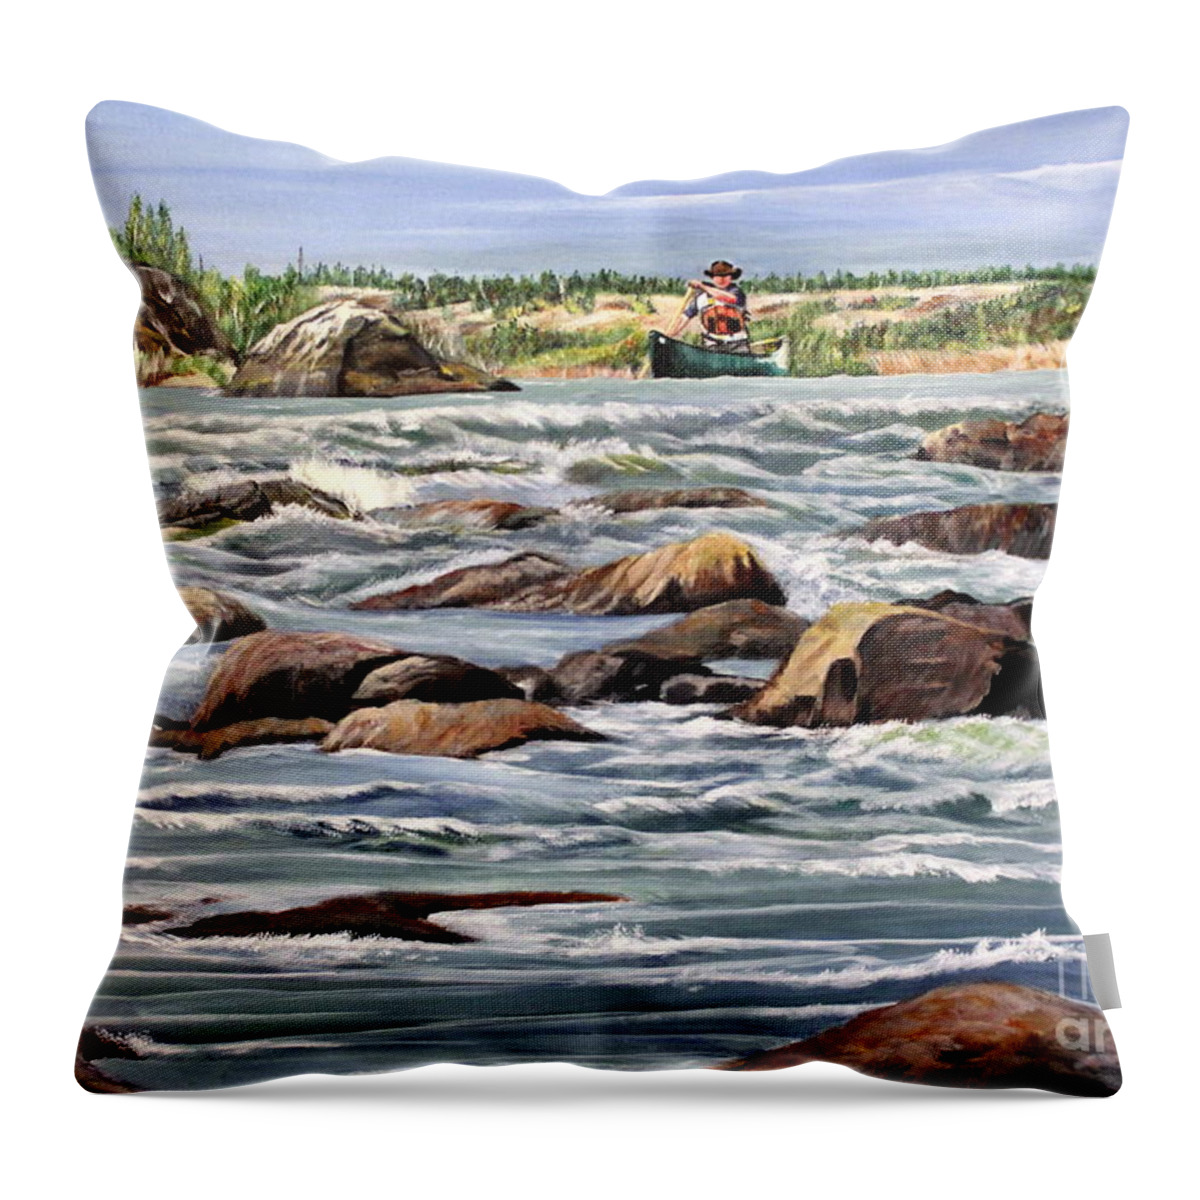 Canoe Throw Pillow featuring the painting The Canoeist by Marilyn McNish